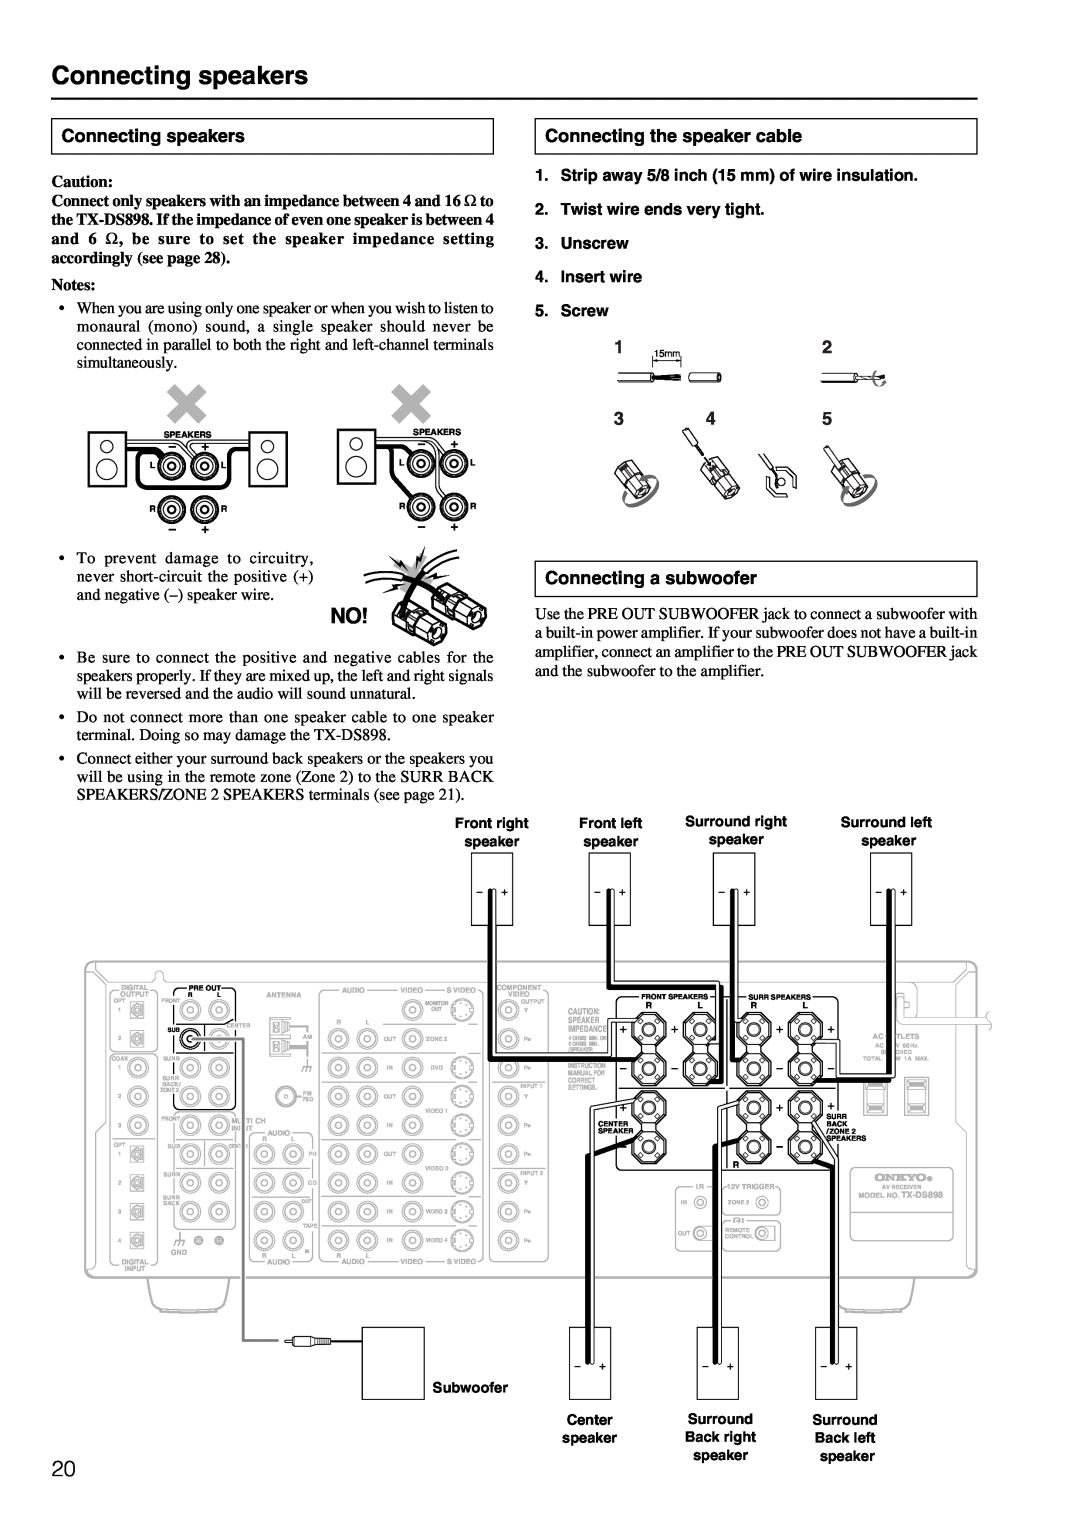 Onkyo TX-DS898 instruction manual Connecting speakers, Connecting the speaker cable, Connecting a subwoofer 